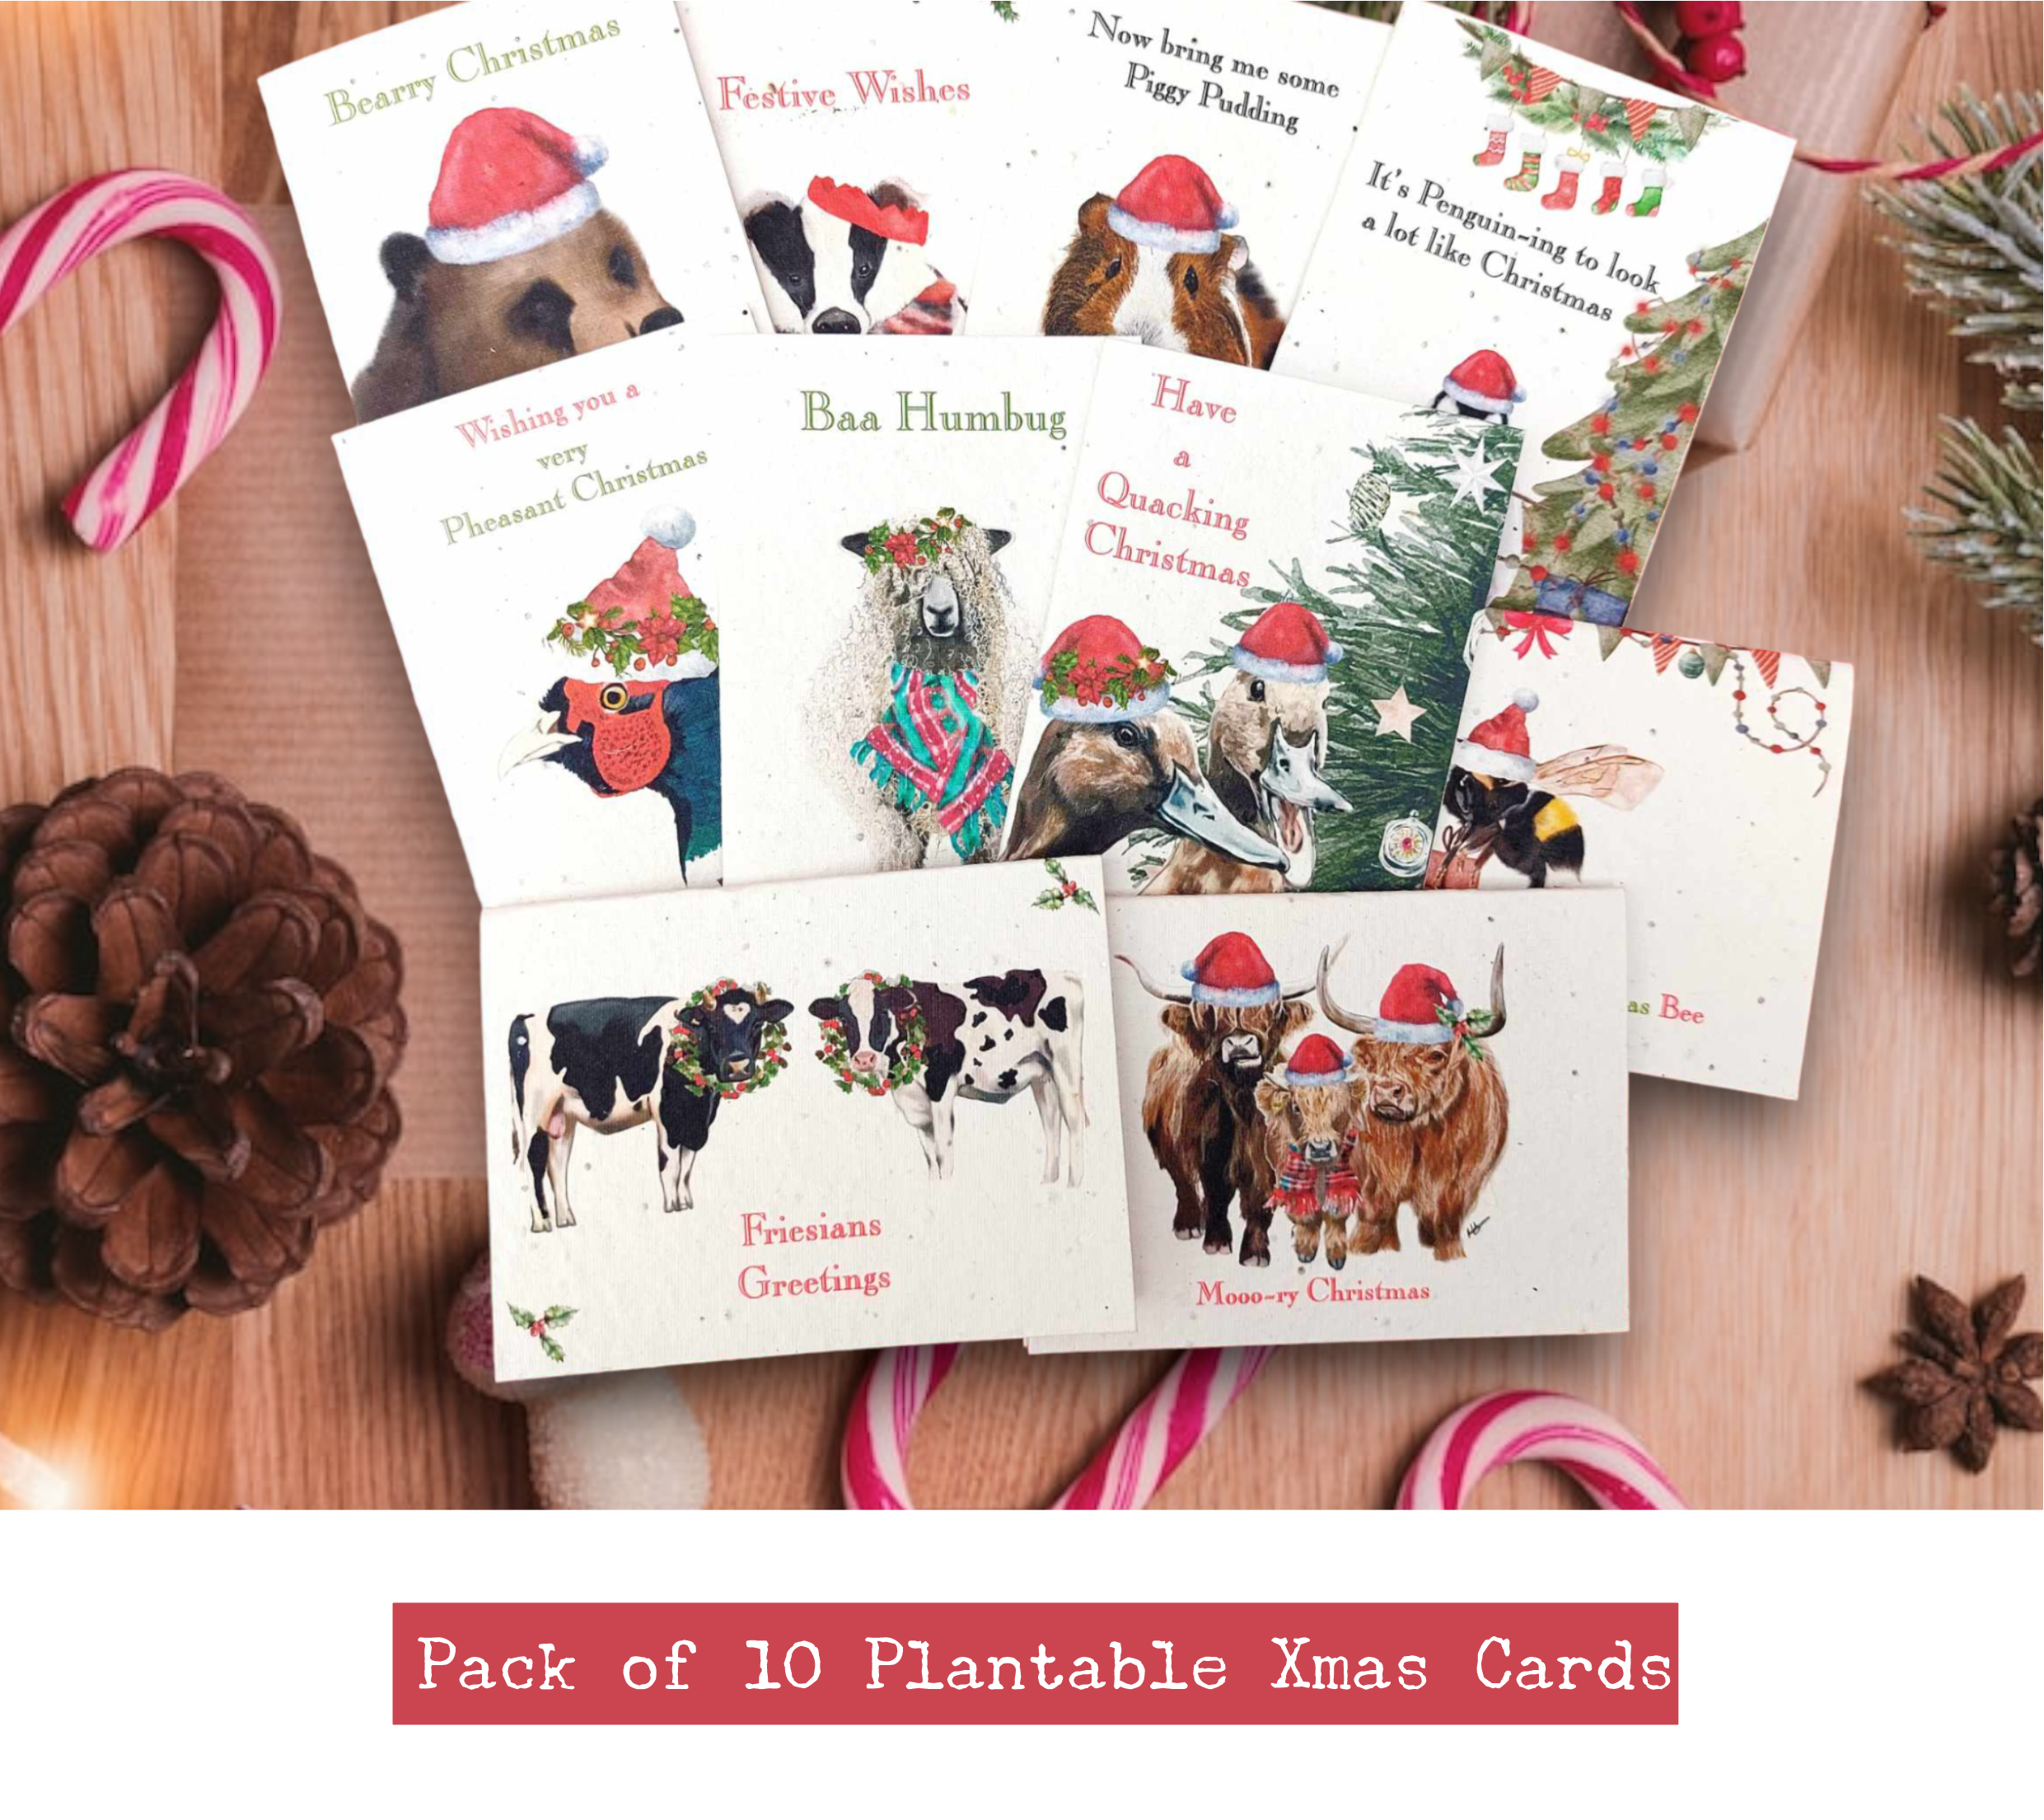 pack of 10 Plantable seed paper Christmas cards with seasonal coloured envelopes in a range of Cute animal designs